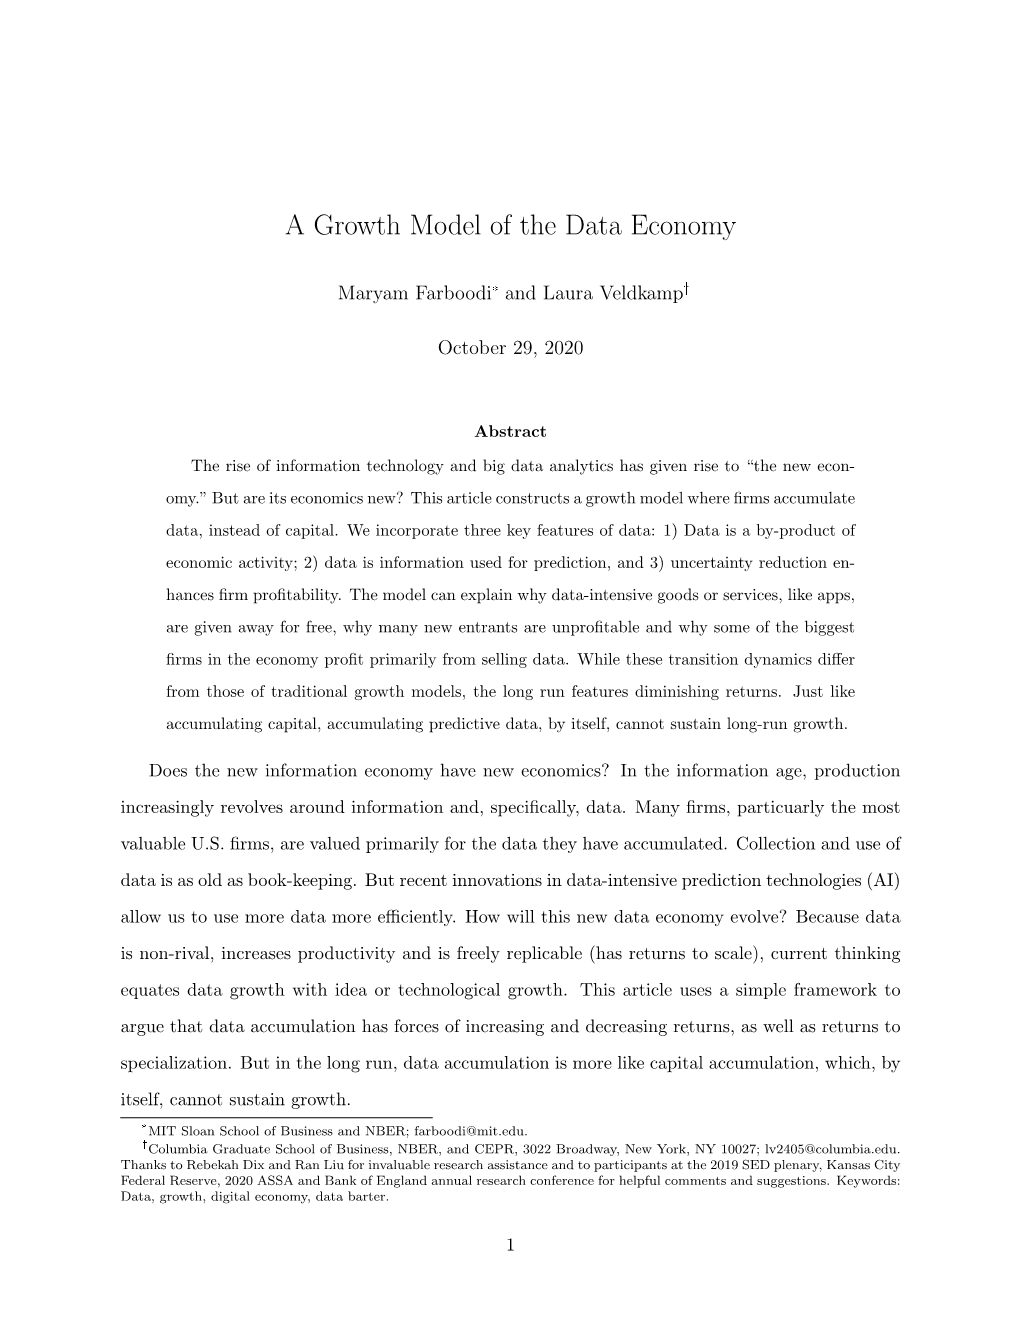 A Growth Model of the Data Economy